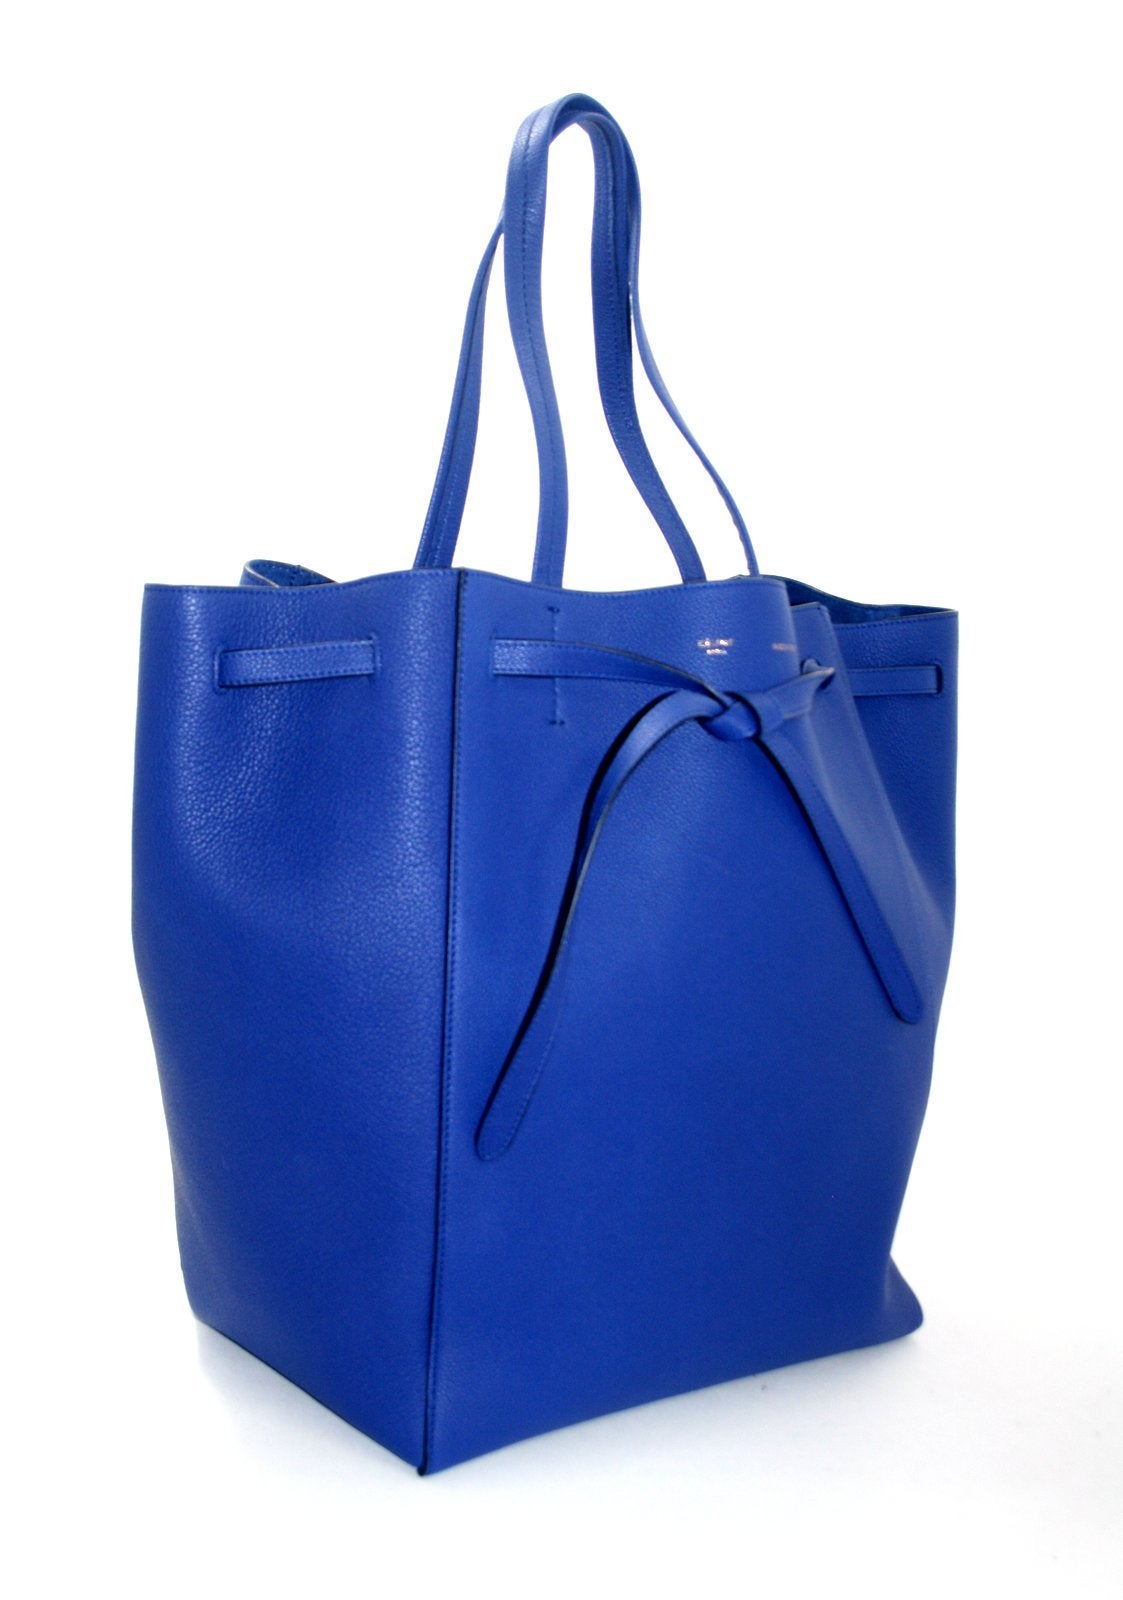 This authentic Celine Blue Leather Cabas Phantom Medium Tote is in pristine condition.  The understated silhouette may be worn with the sides flared out or tucked in; either way it easily holds all the essentials for a busy day. 

Cobalt blue